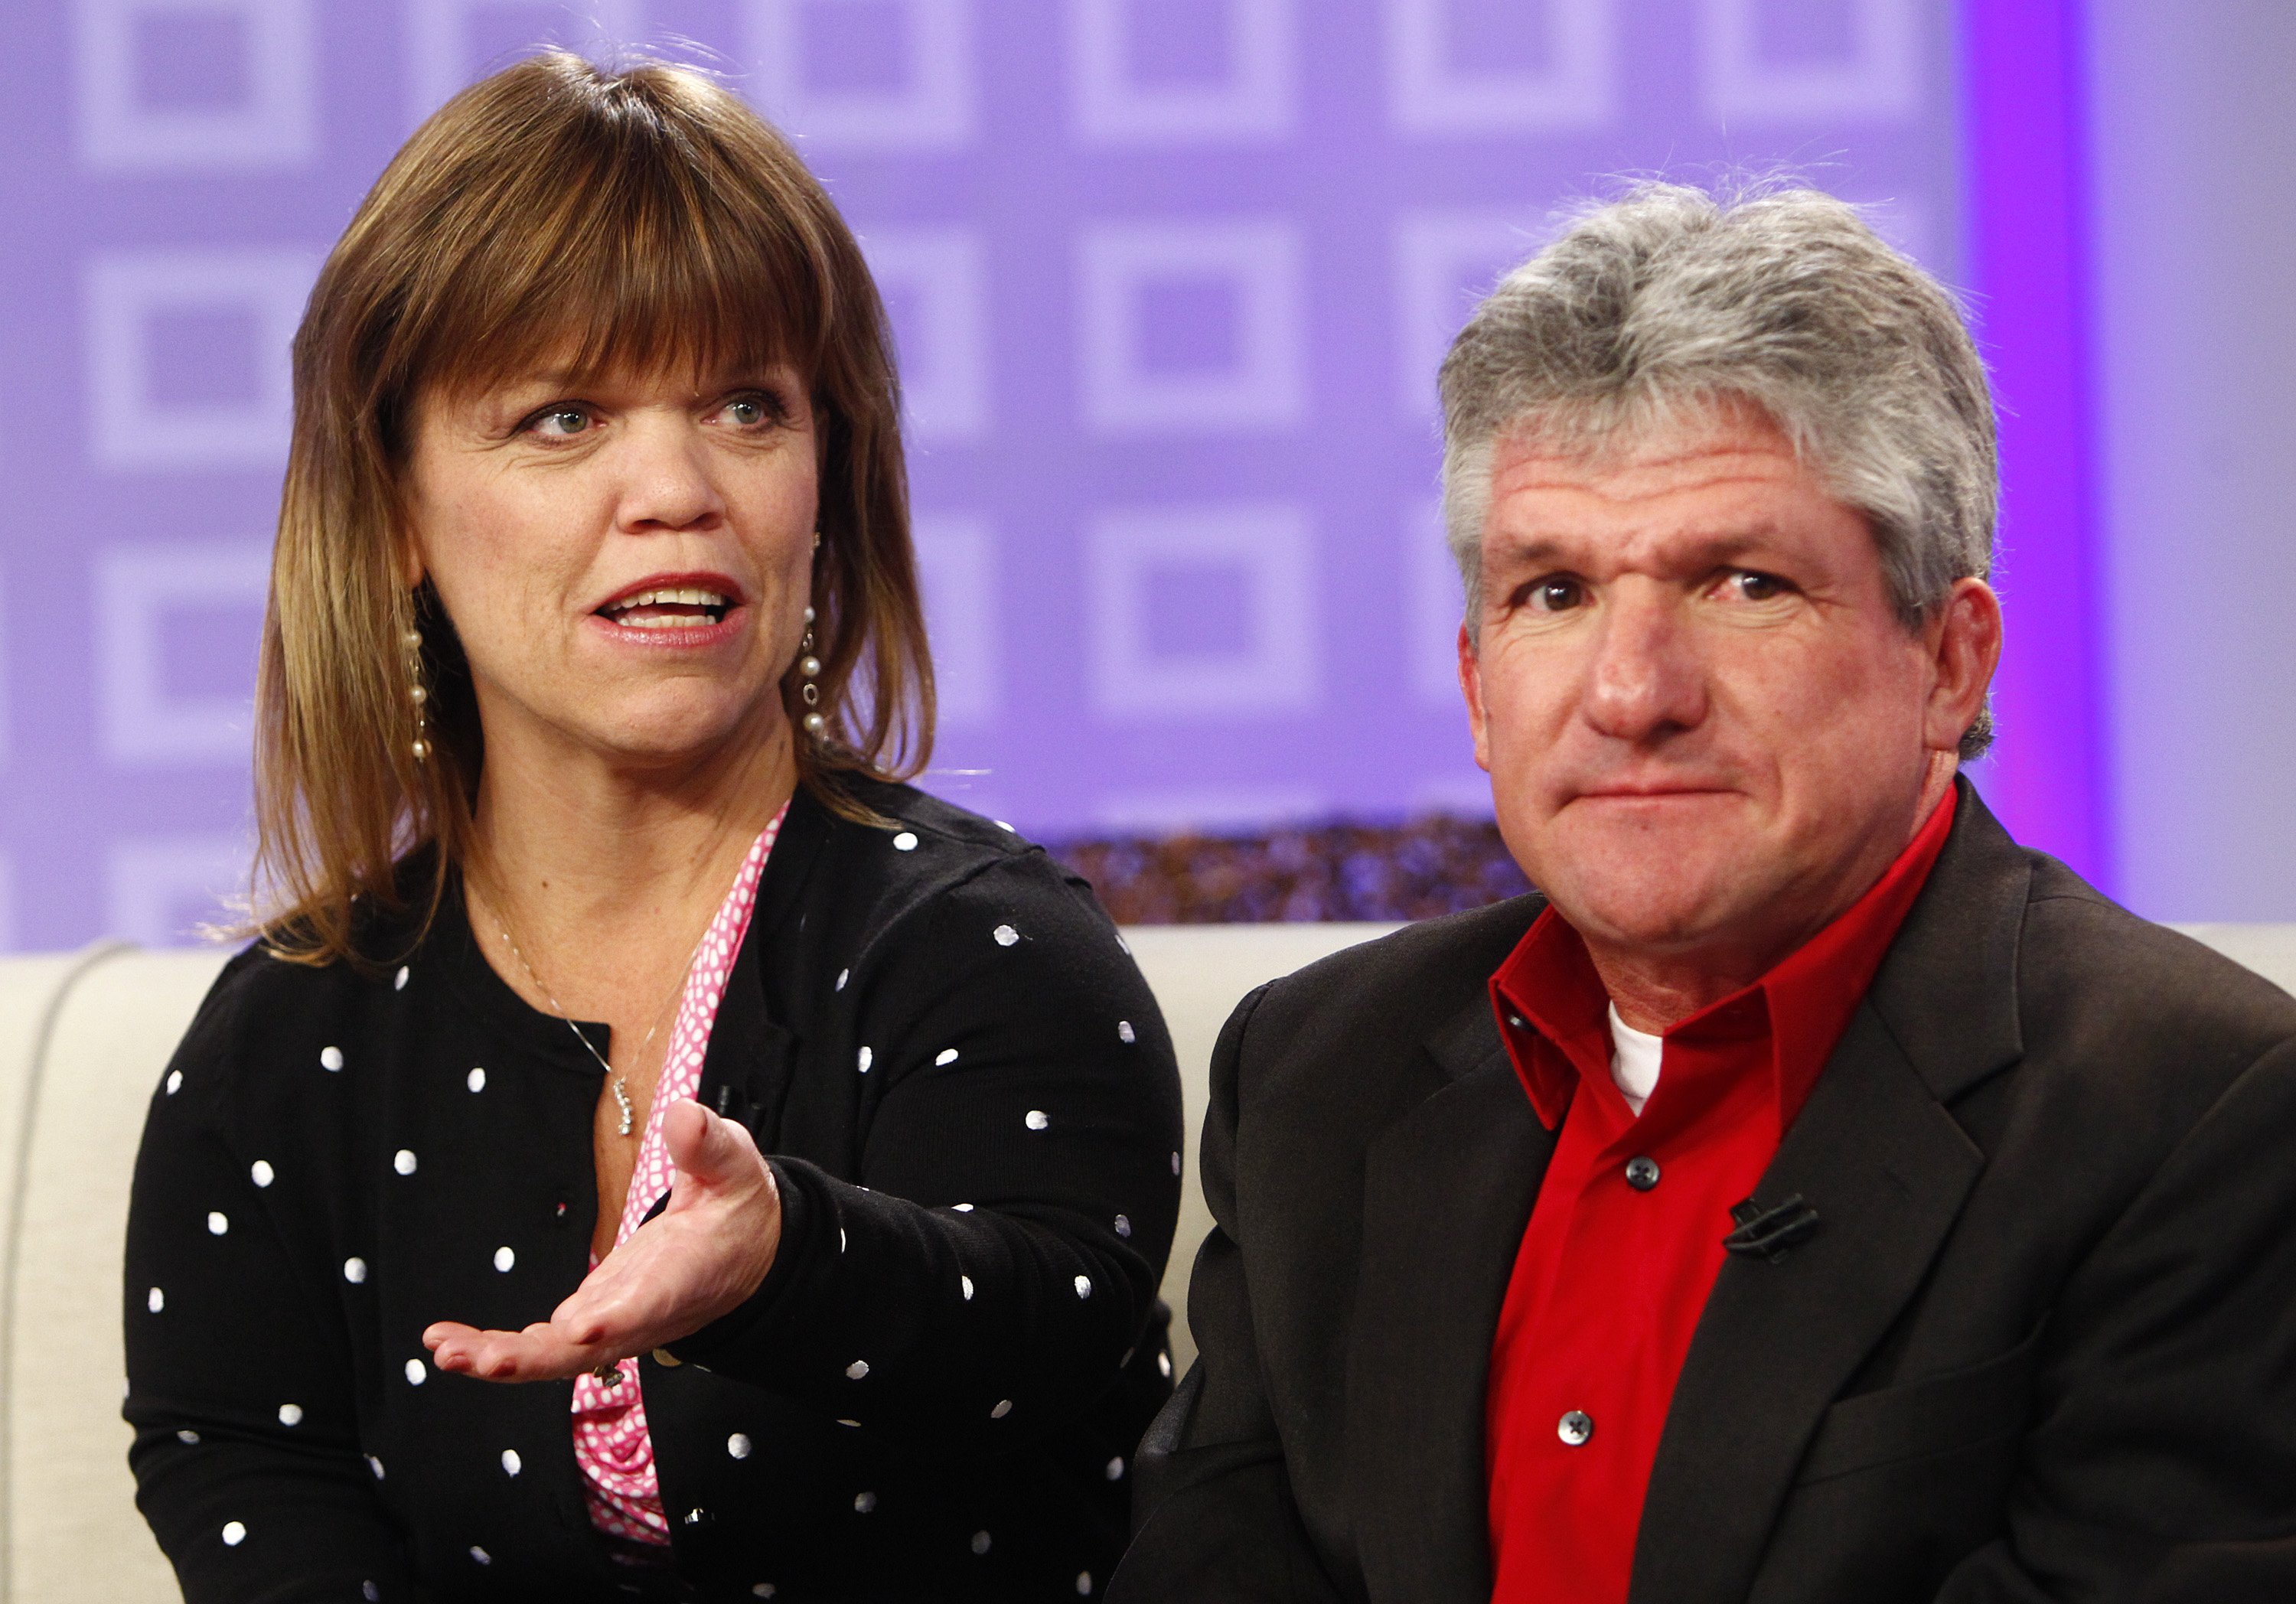 Amy Roloff and Matt Roloff appear on NBC News' "Today" show, Feb 2012| Photo: Getty Images